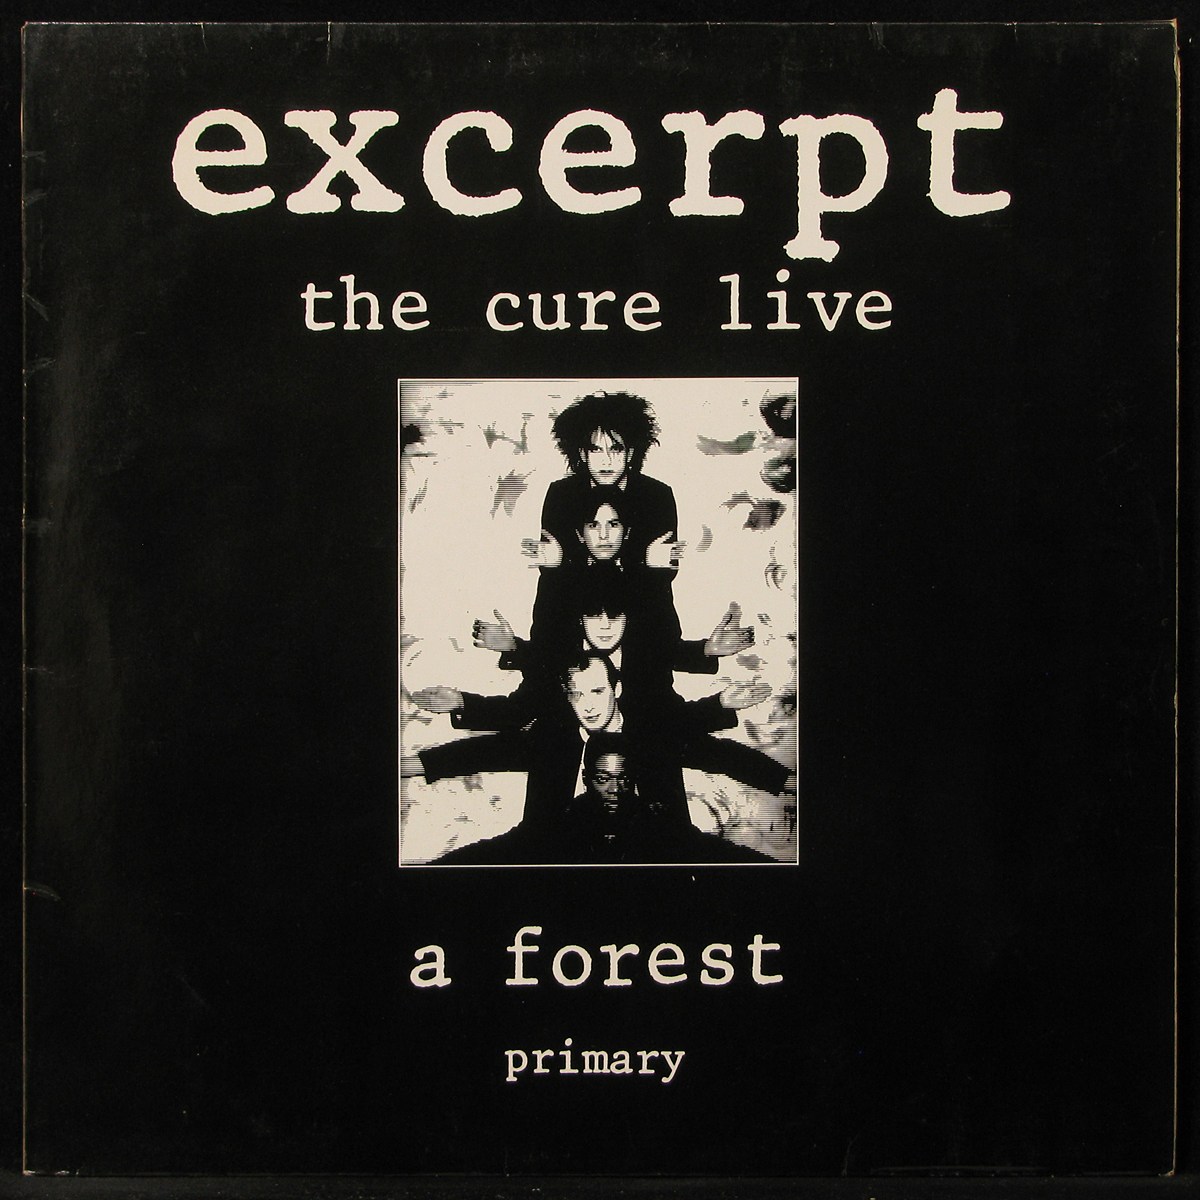 The cure forest. The Cure Live. The Cure концерт. The Cure Concert the Cure Live 1984. The Cure группа обложки.